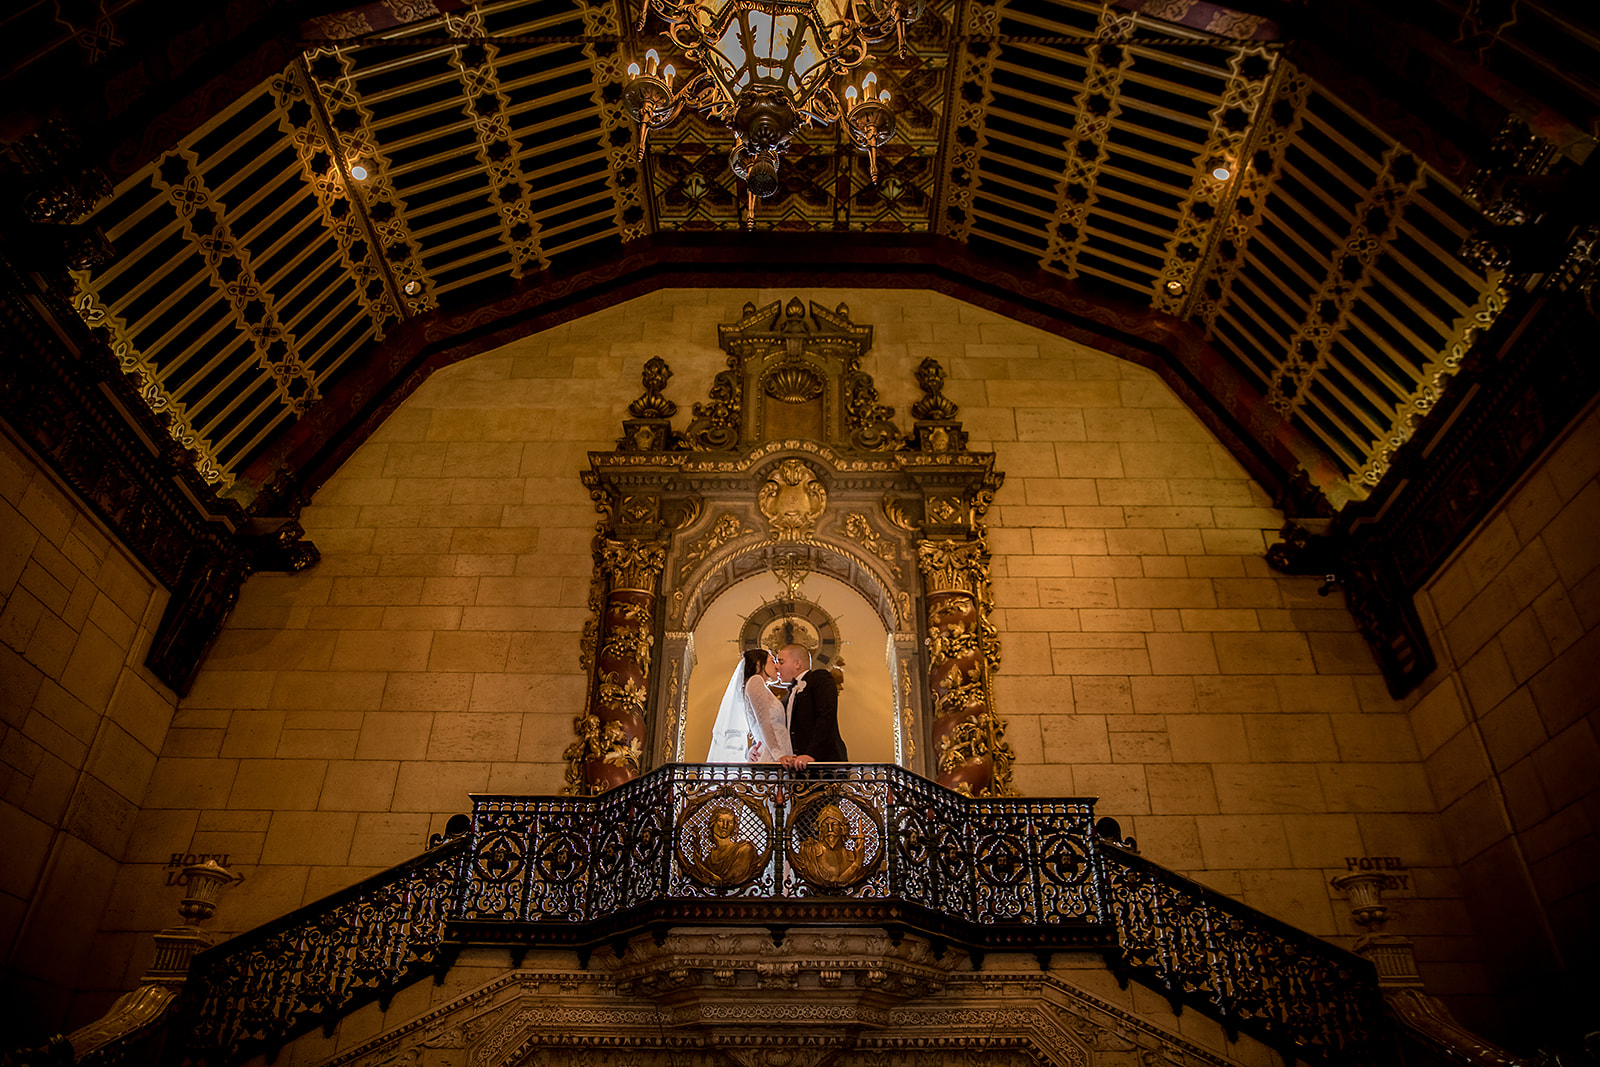 A wedding couple standing on the stairs of an ornate building in Los Angeles.